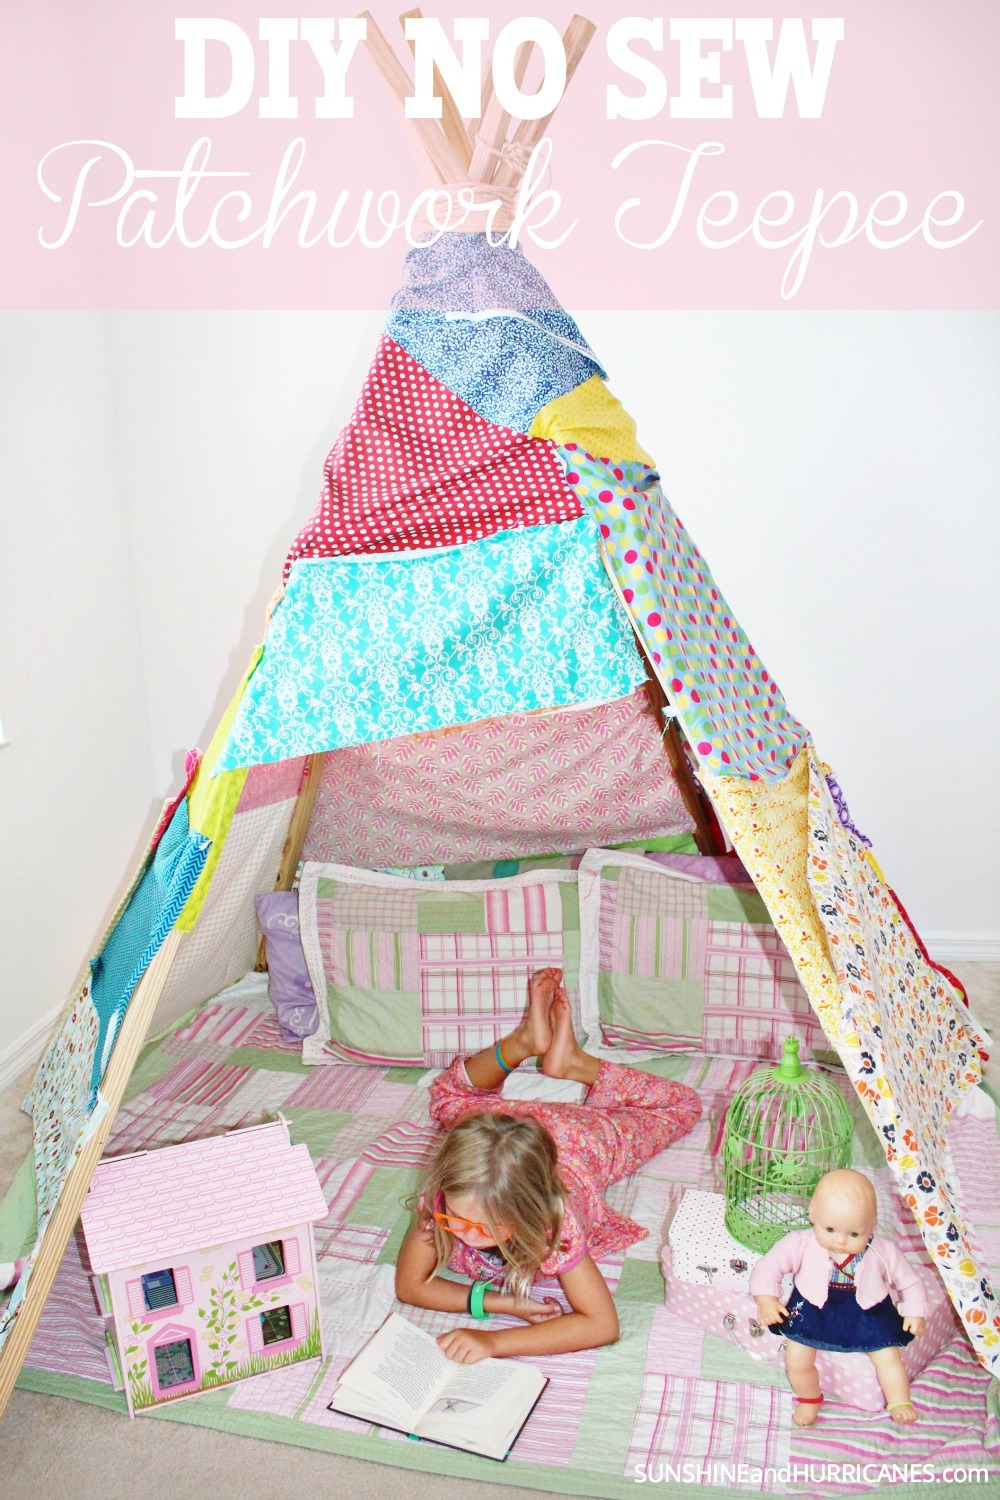 What could be more fun for your child then their very own teepee? A great way to pass the time during cold winter months or rainy summer days. Even better, it's so easy to build you won't believe it. No expertise in DIY needed. No Sew Patchwork Teepee DIY. SunshineandHurricanes.com